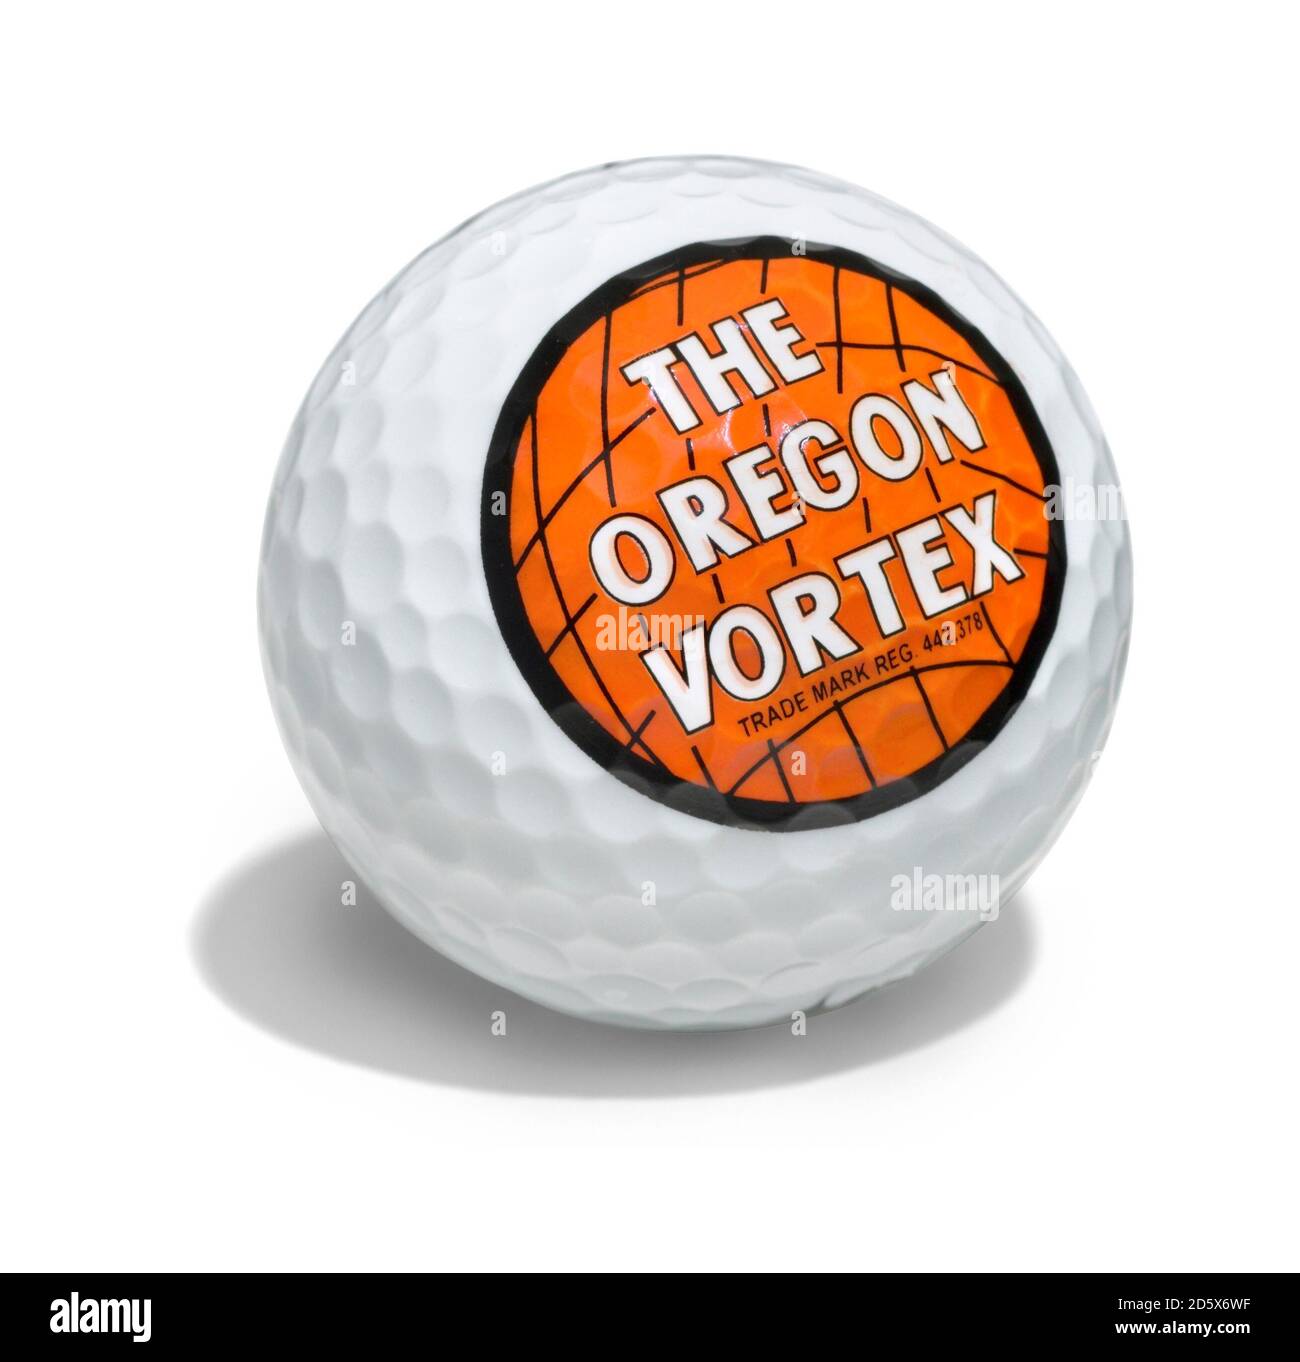 The Oregon Vortex golf ball photographed on a white background